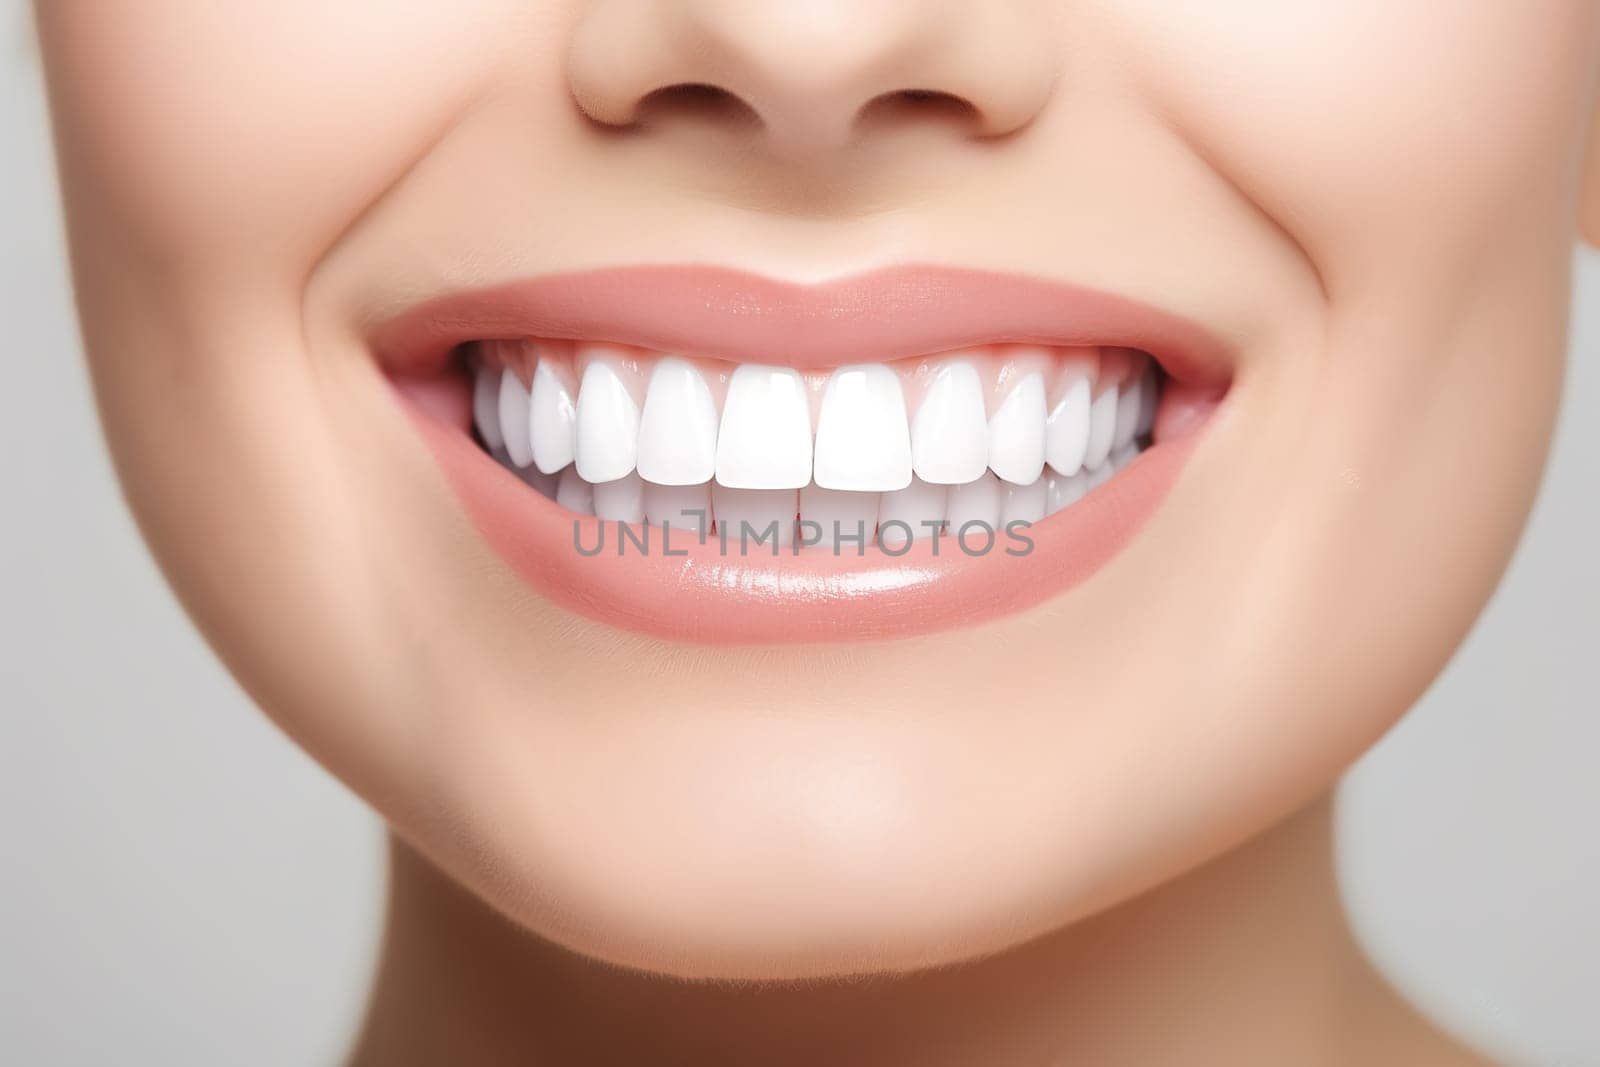 Snow-white smile of a woman. Demonstration of healthy teeth. by Yurich32